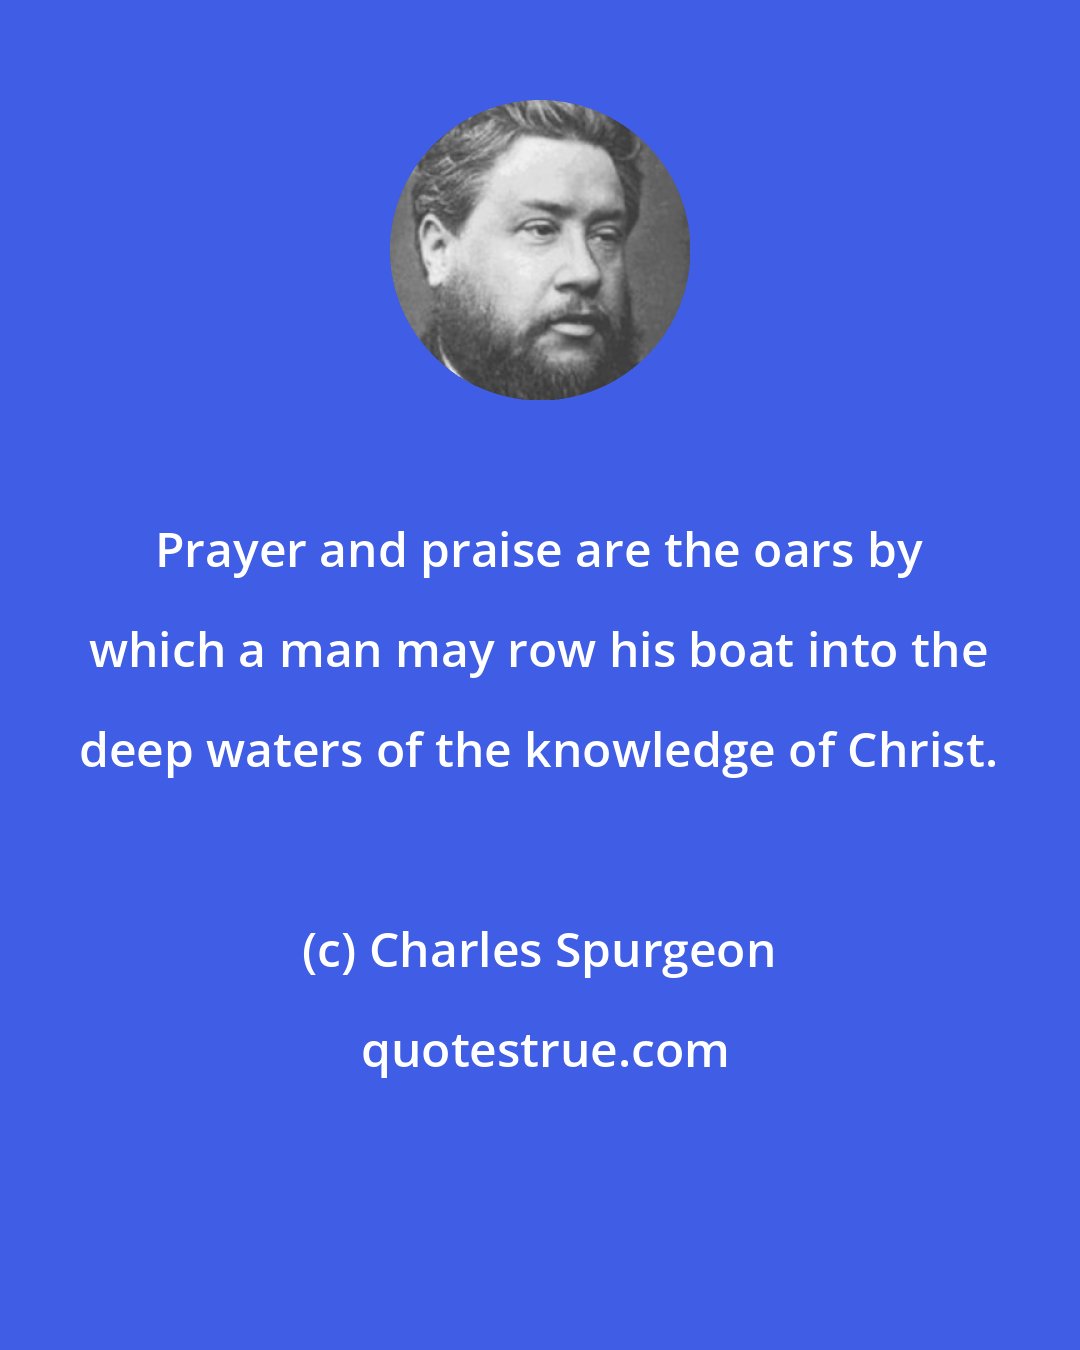 Charles Spurgeon: Prayer and praise are the oars by which a man may row his boat into the deep waters of the knowledge of Christ.